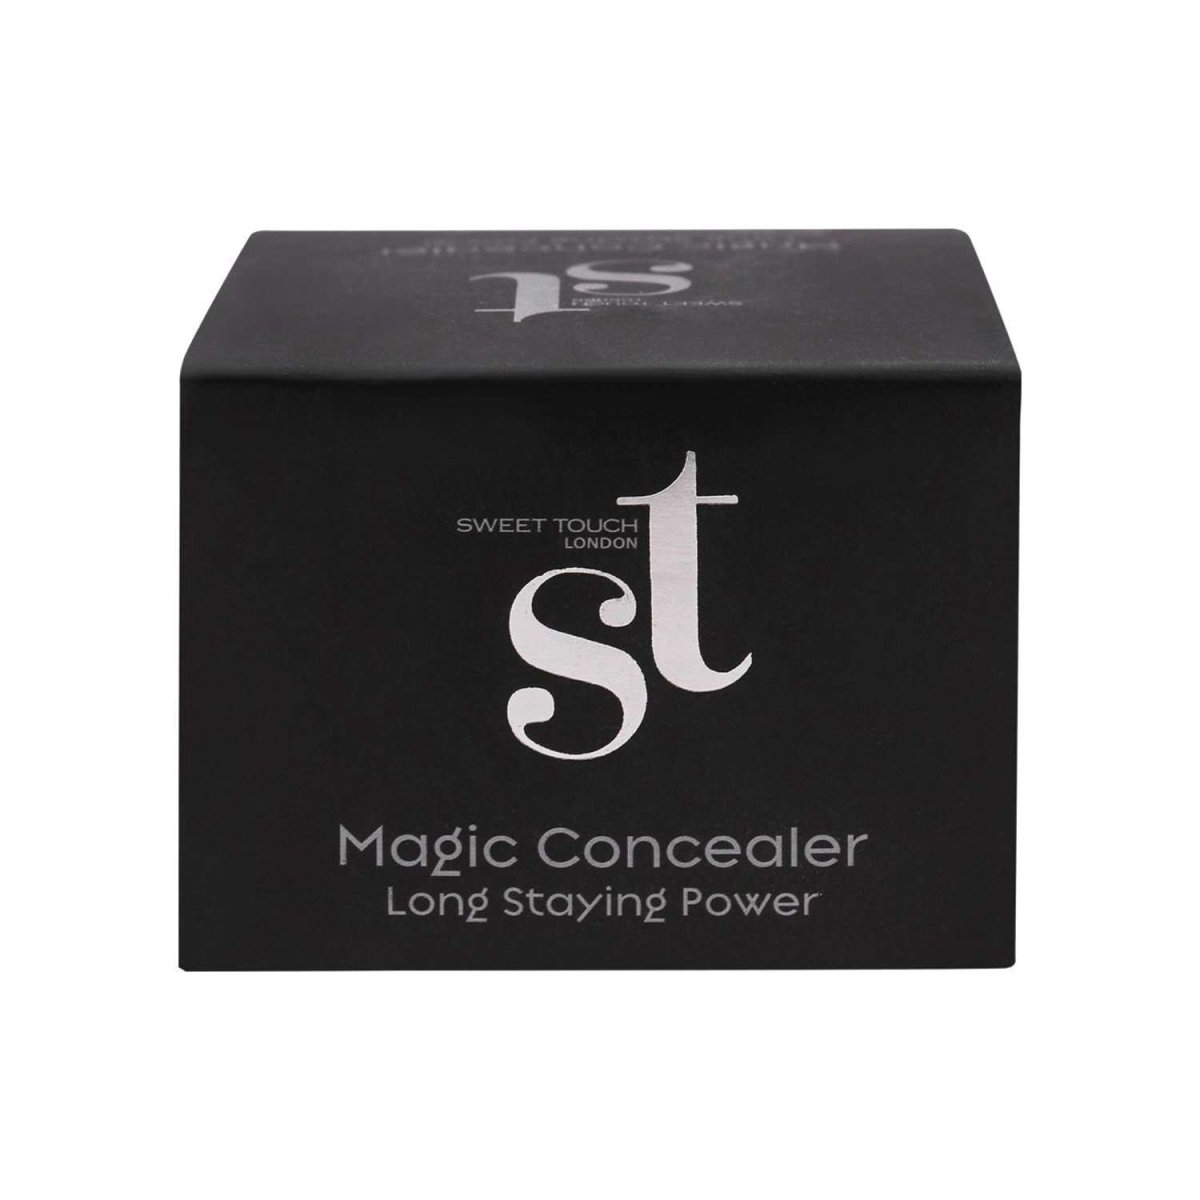 Magic Concealer Long Staying Power - Chestnut 33